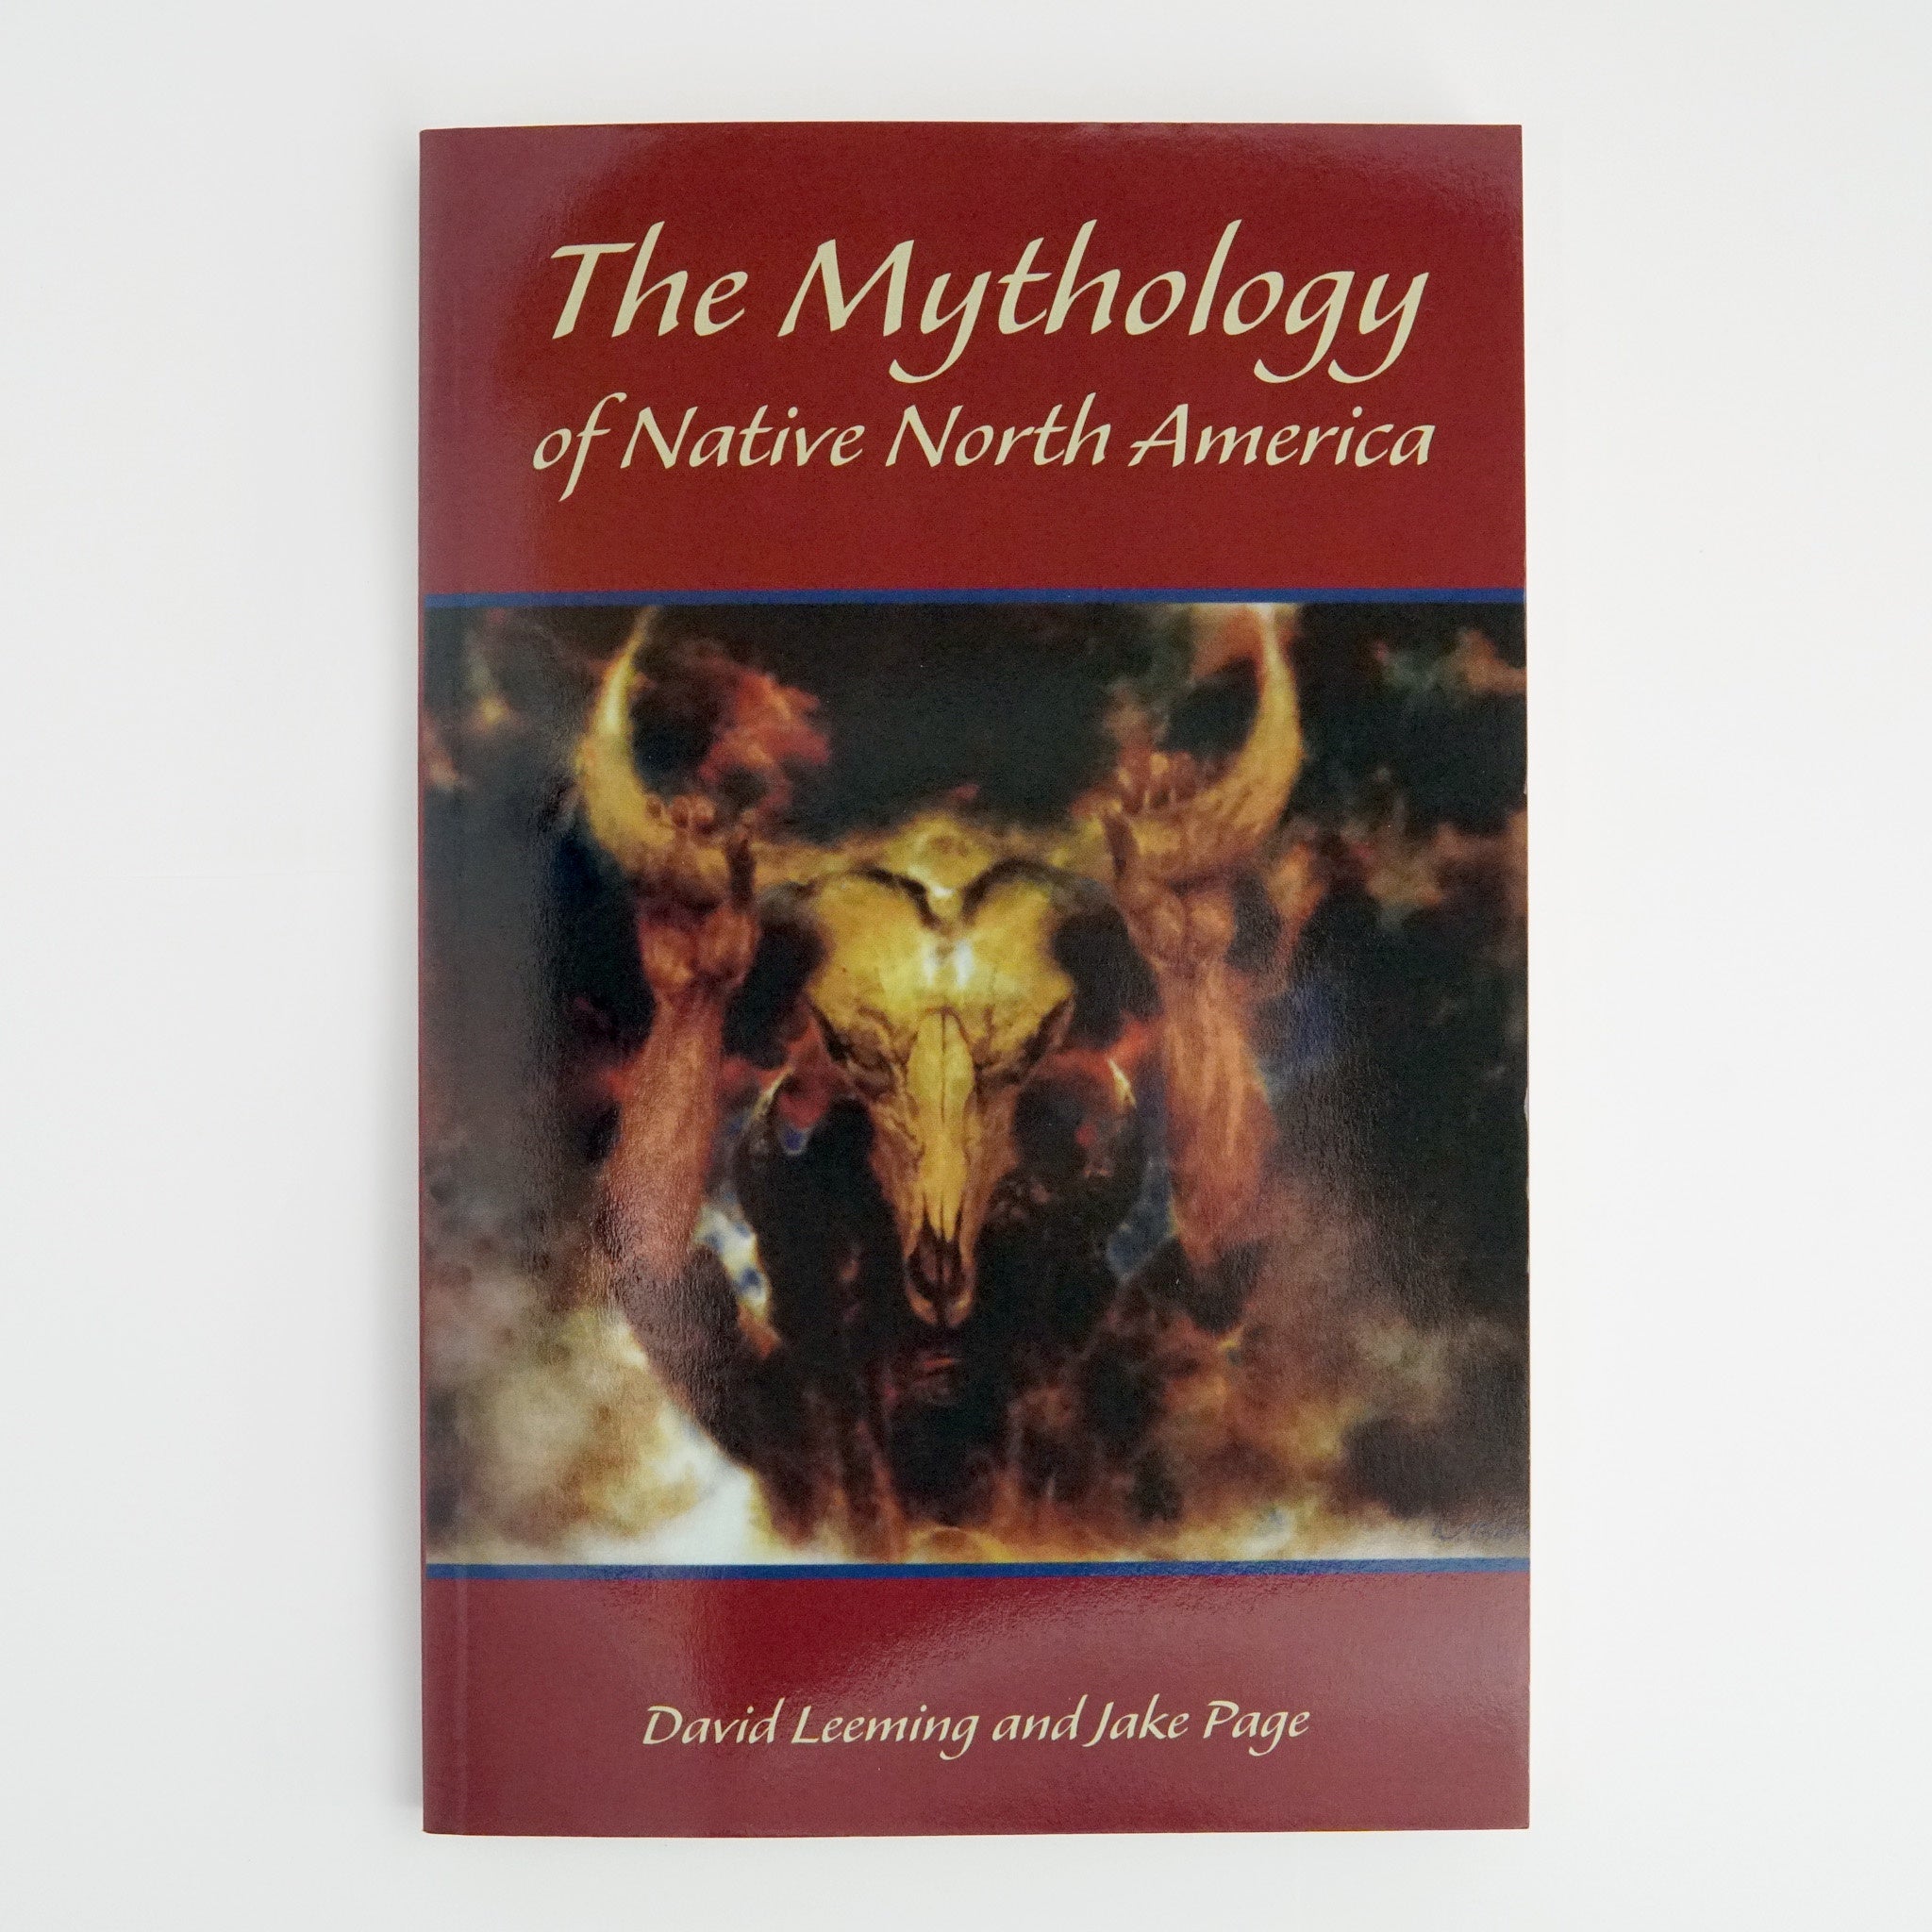 BK 12 THE MYTHOLOGY OF NATIVE NORTH AMERICA BY  D. LEEMING & J. PAGE #21007147 D2 OCT23